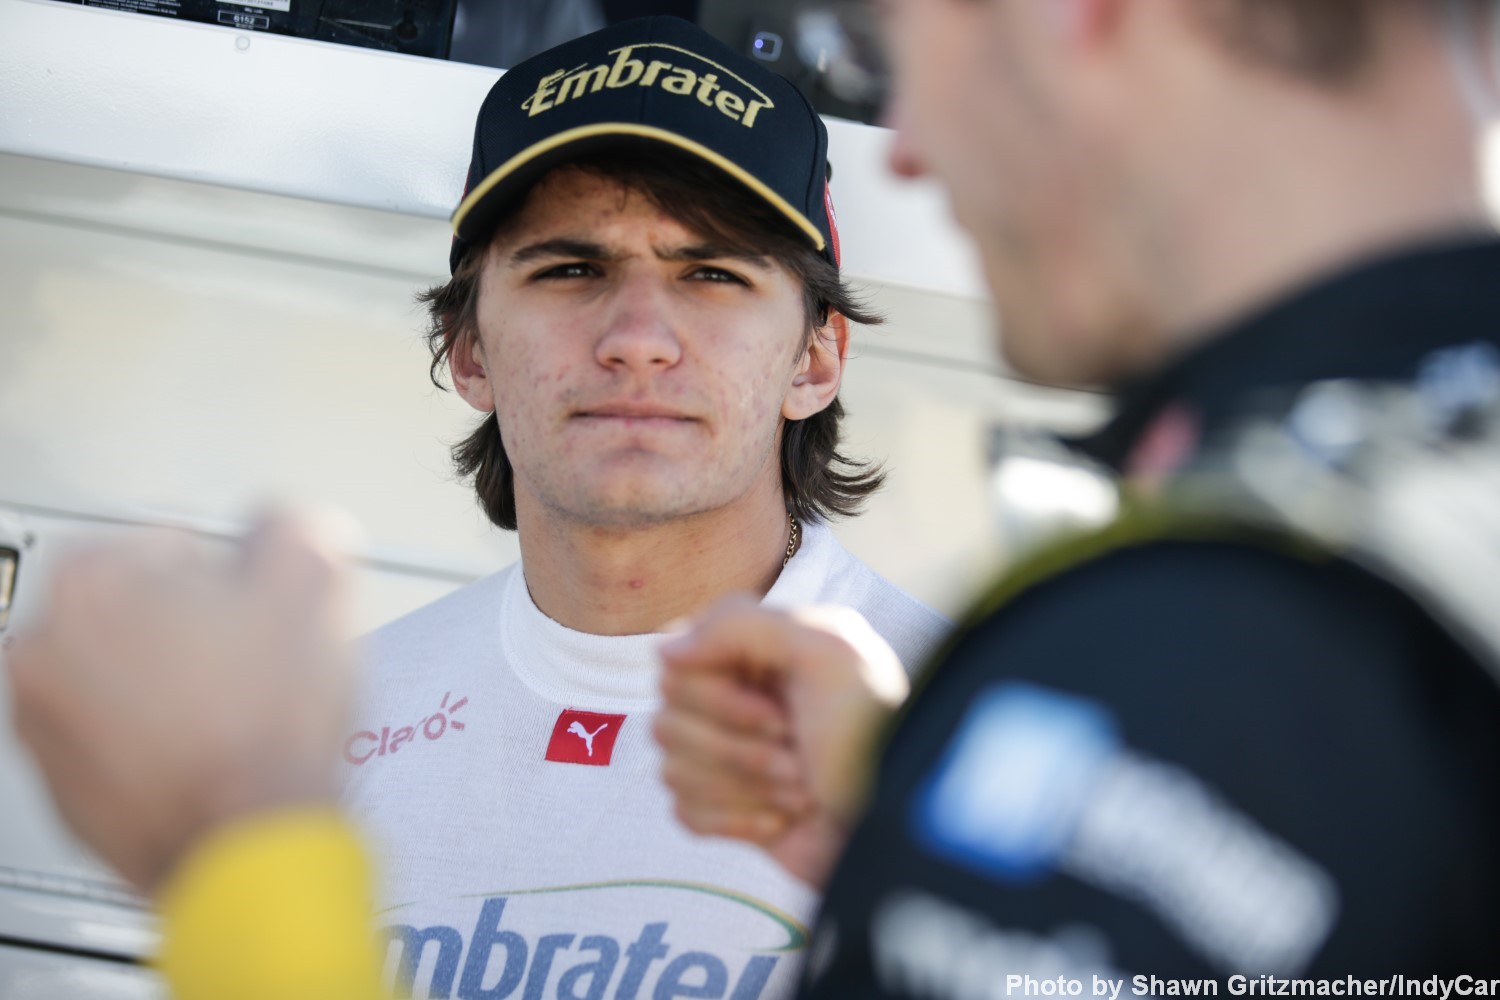 The door is open for Fittipaldi to do some other racing in 2019